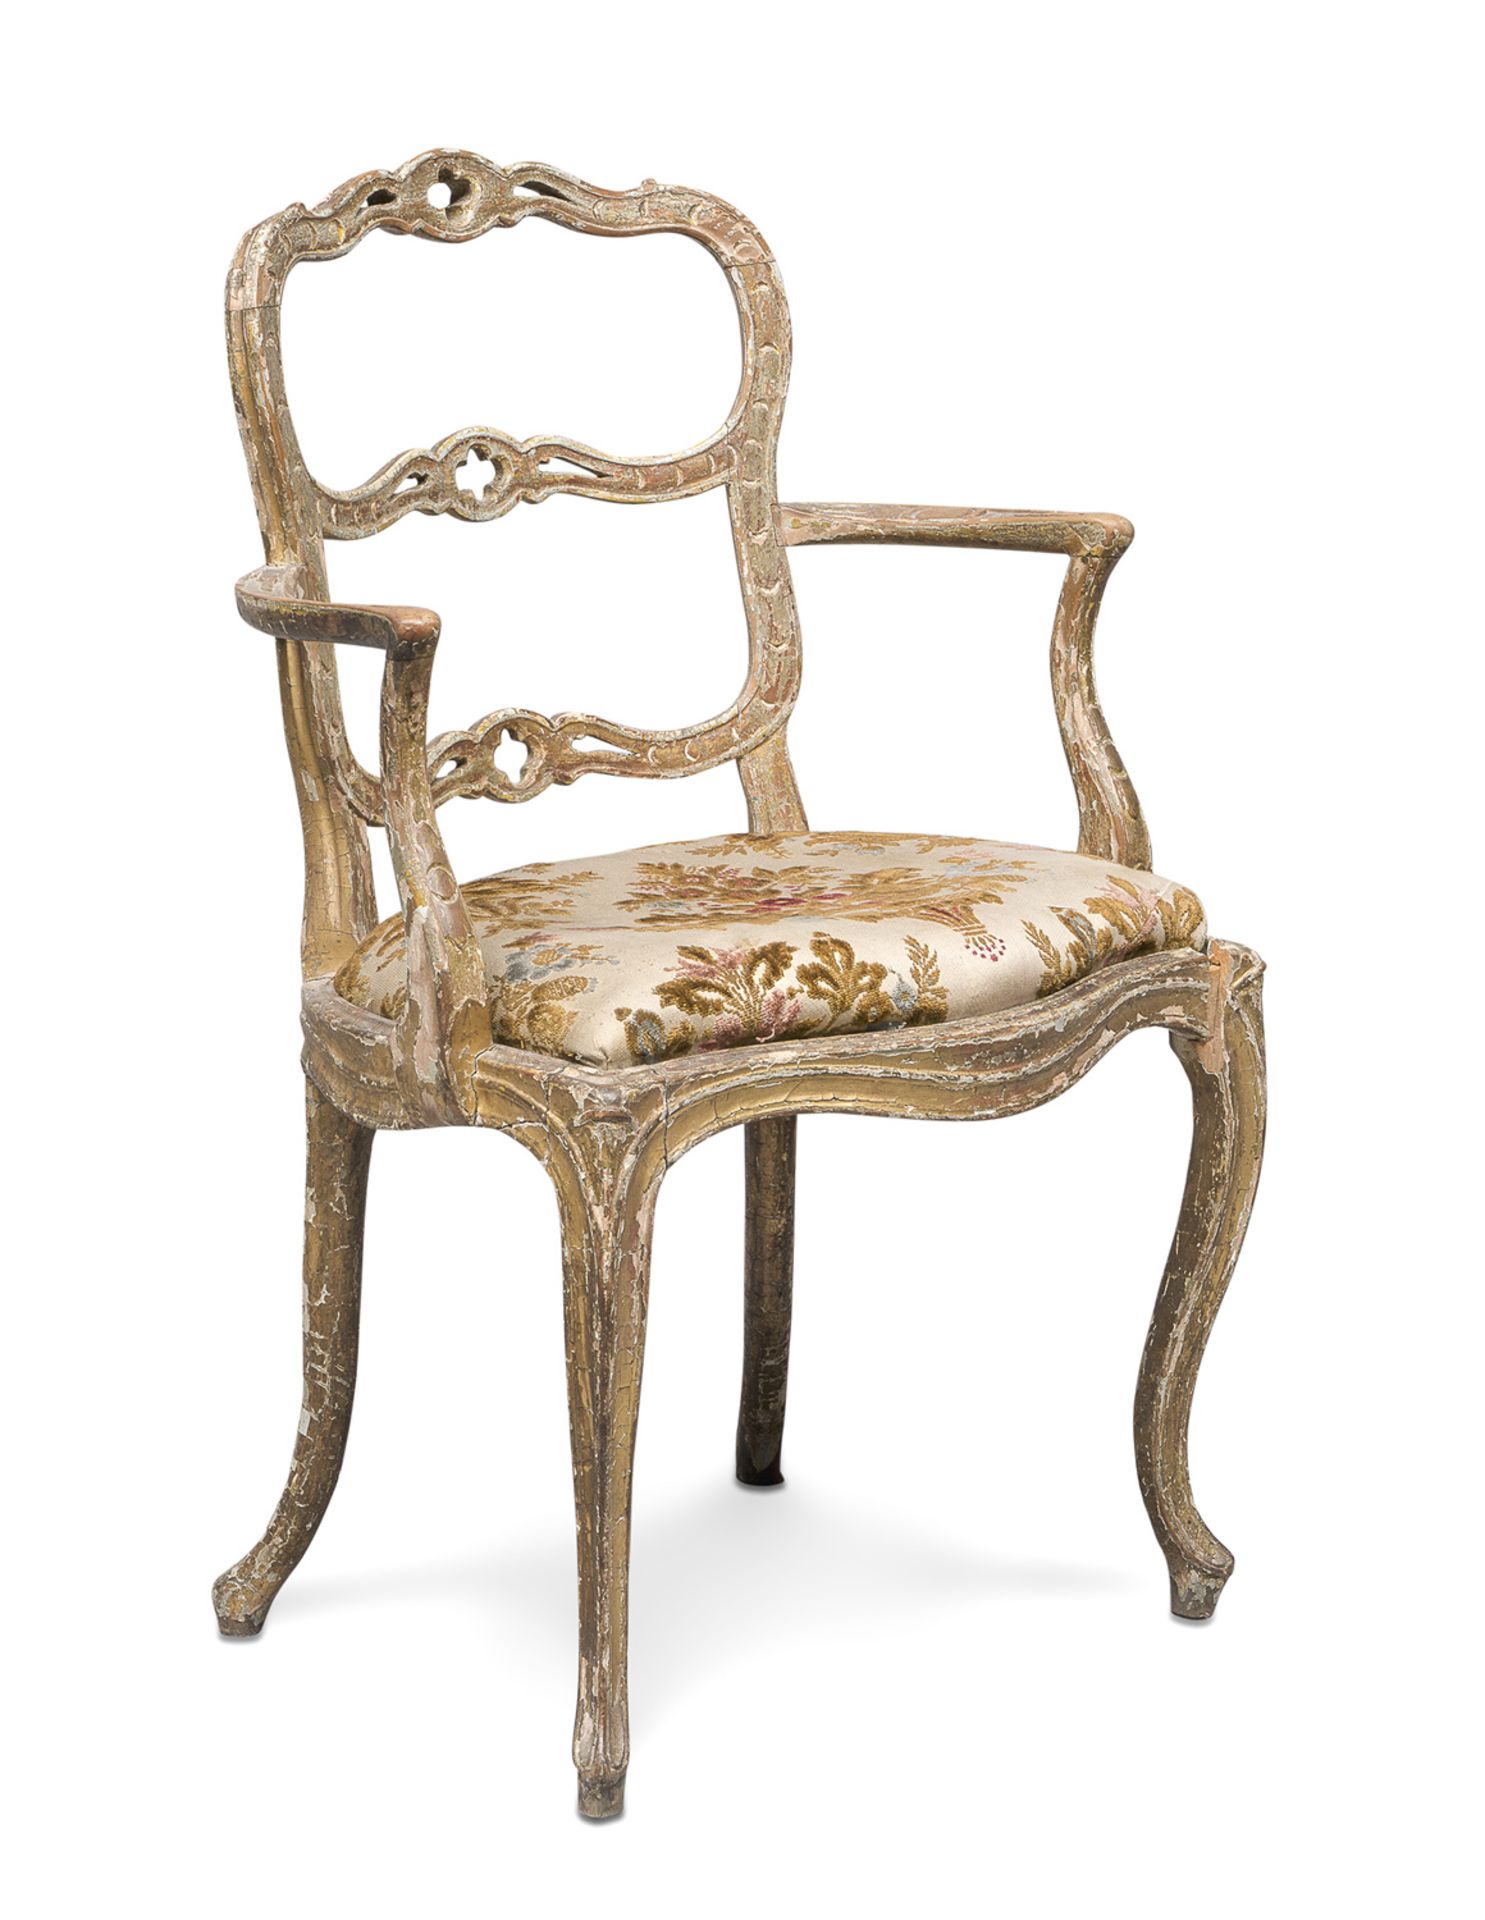 REMAINS OF LACQUERED WOODEN ARMCHAIR PROBABLY VENETO LATE 18th CENTURY